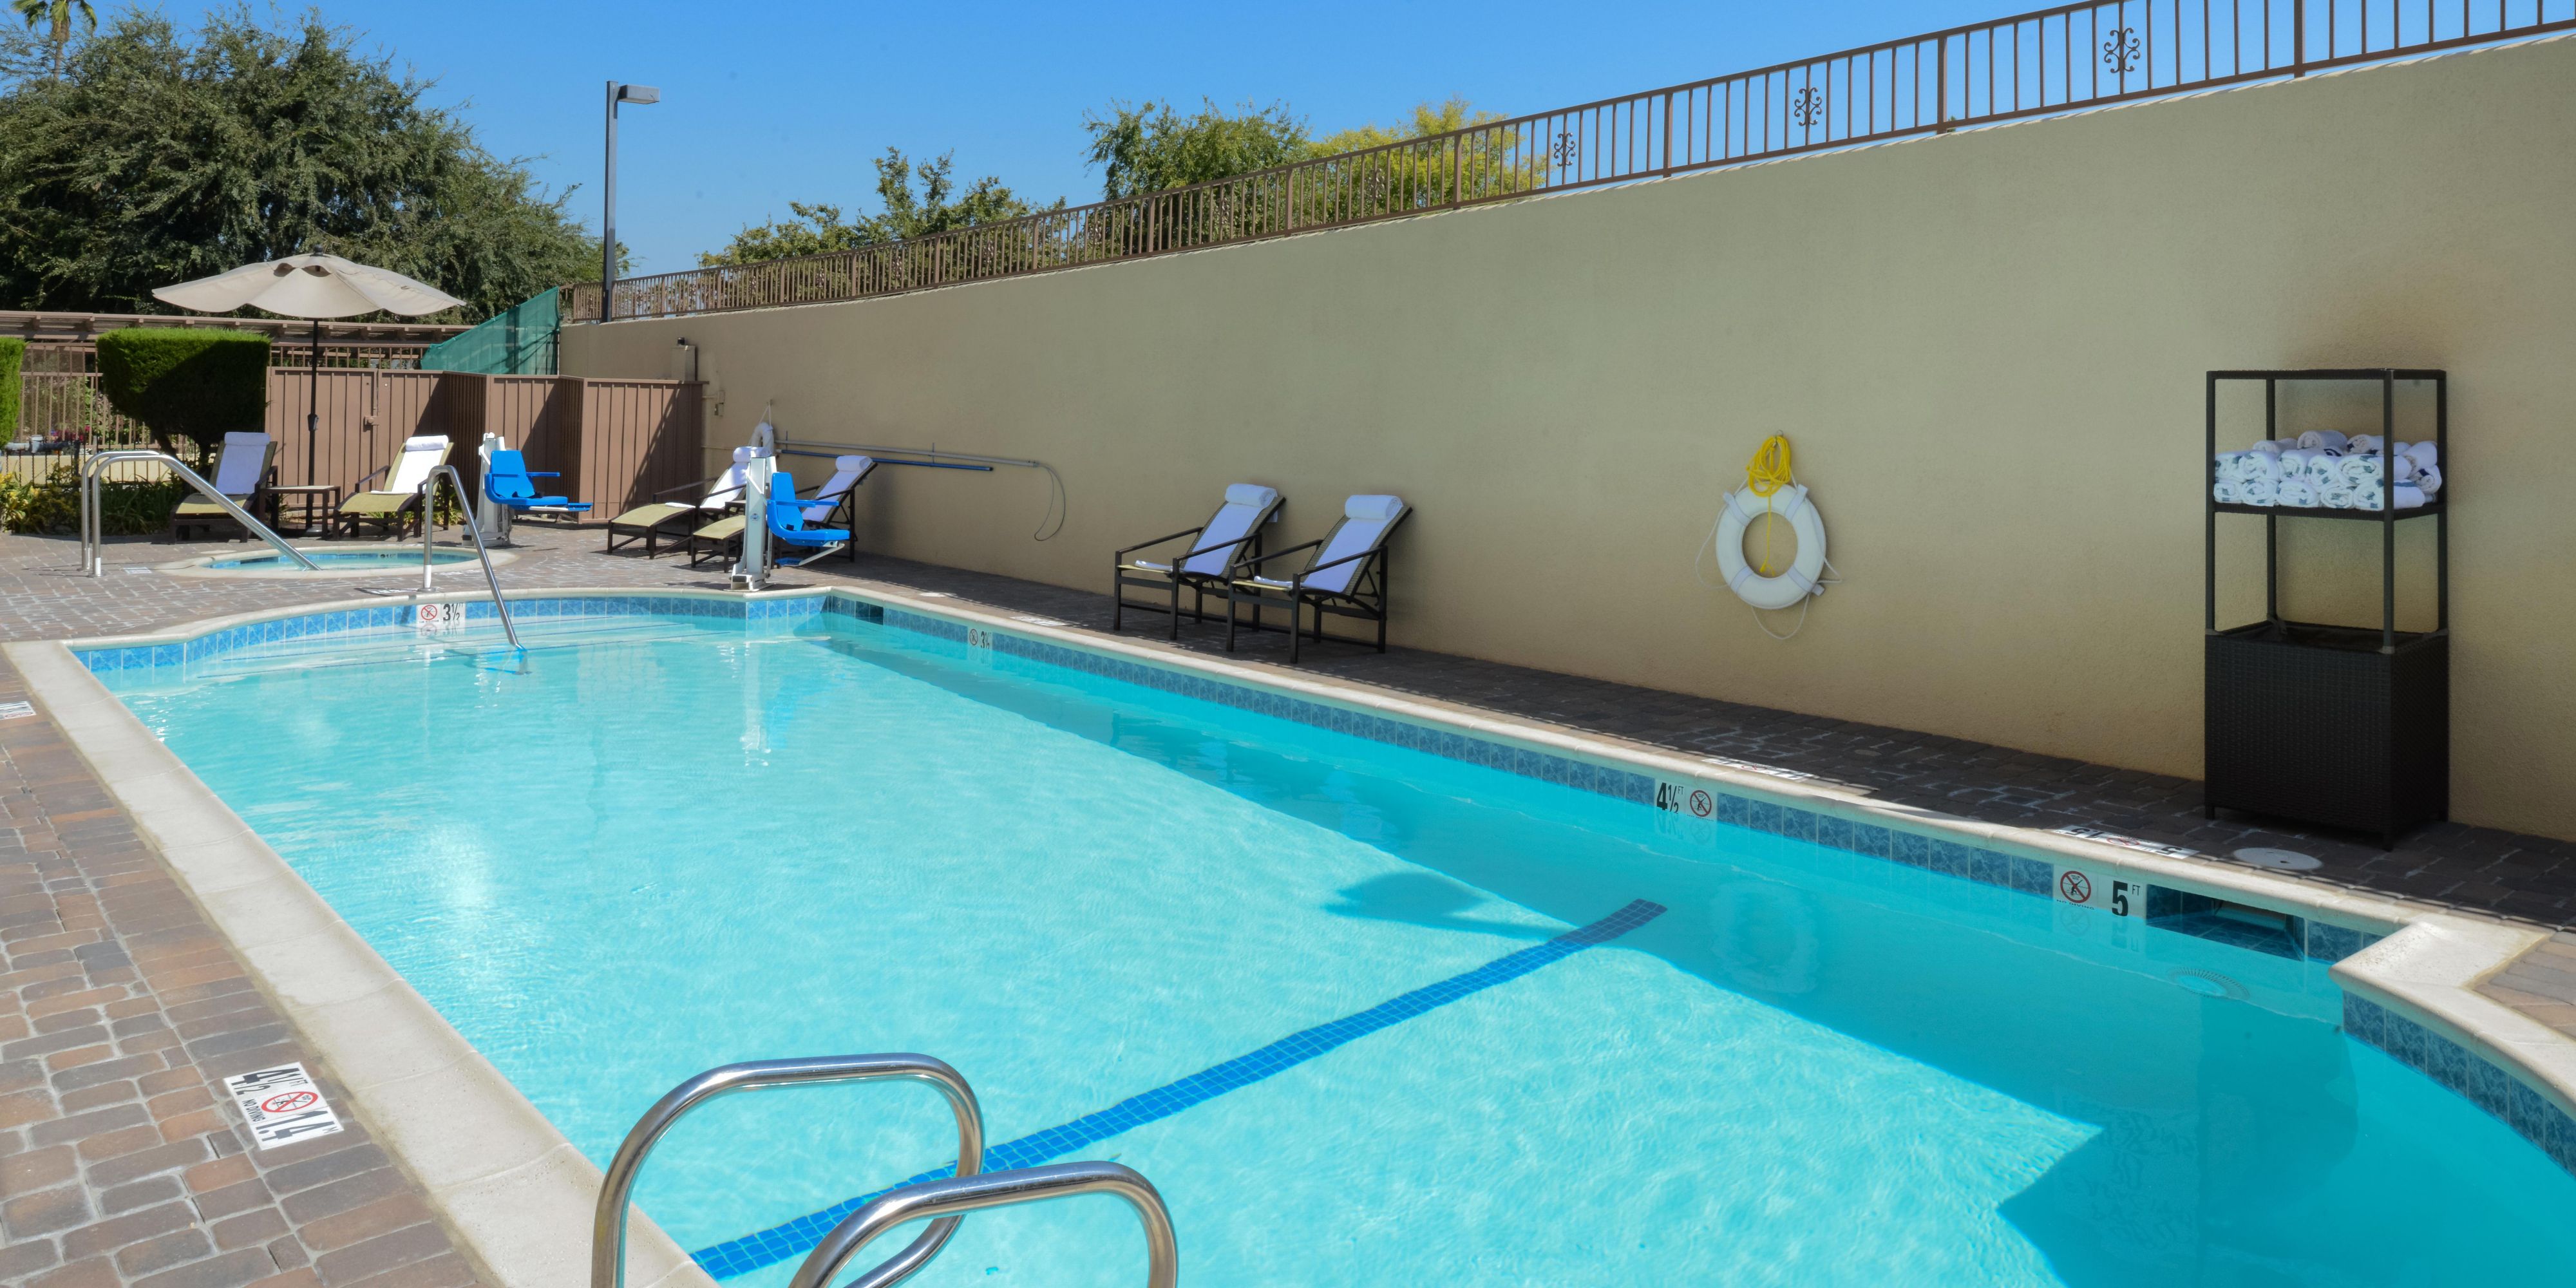 Enjoy the beautiful Pasadena, California weather while relaxing by our outdoor pool and whirlpool. Open every day from 7:00 AM to 10:30 PM.